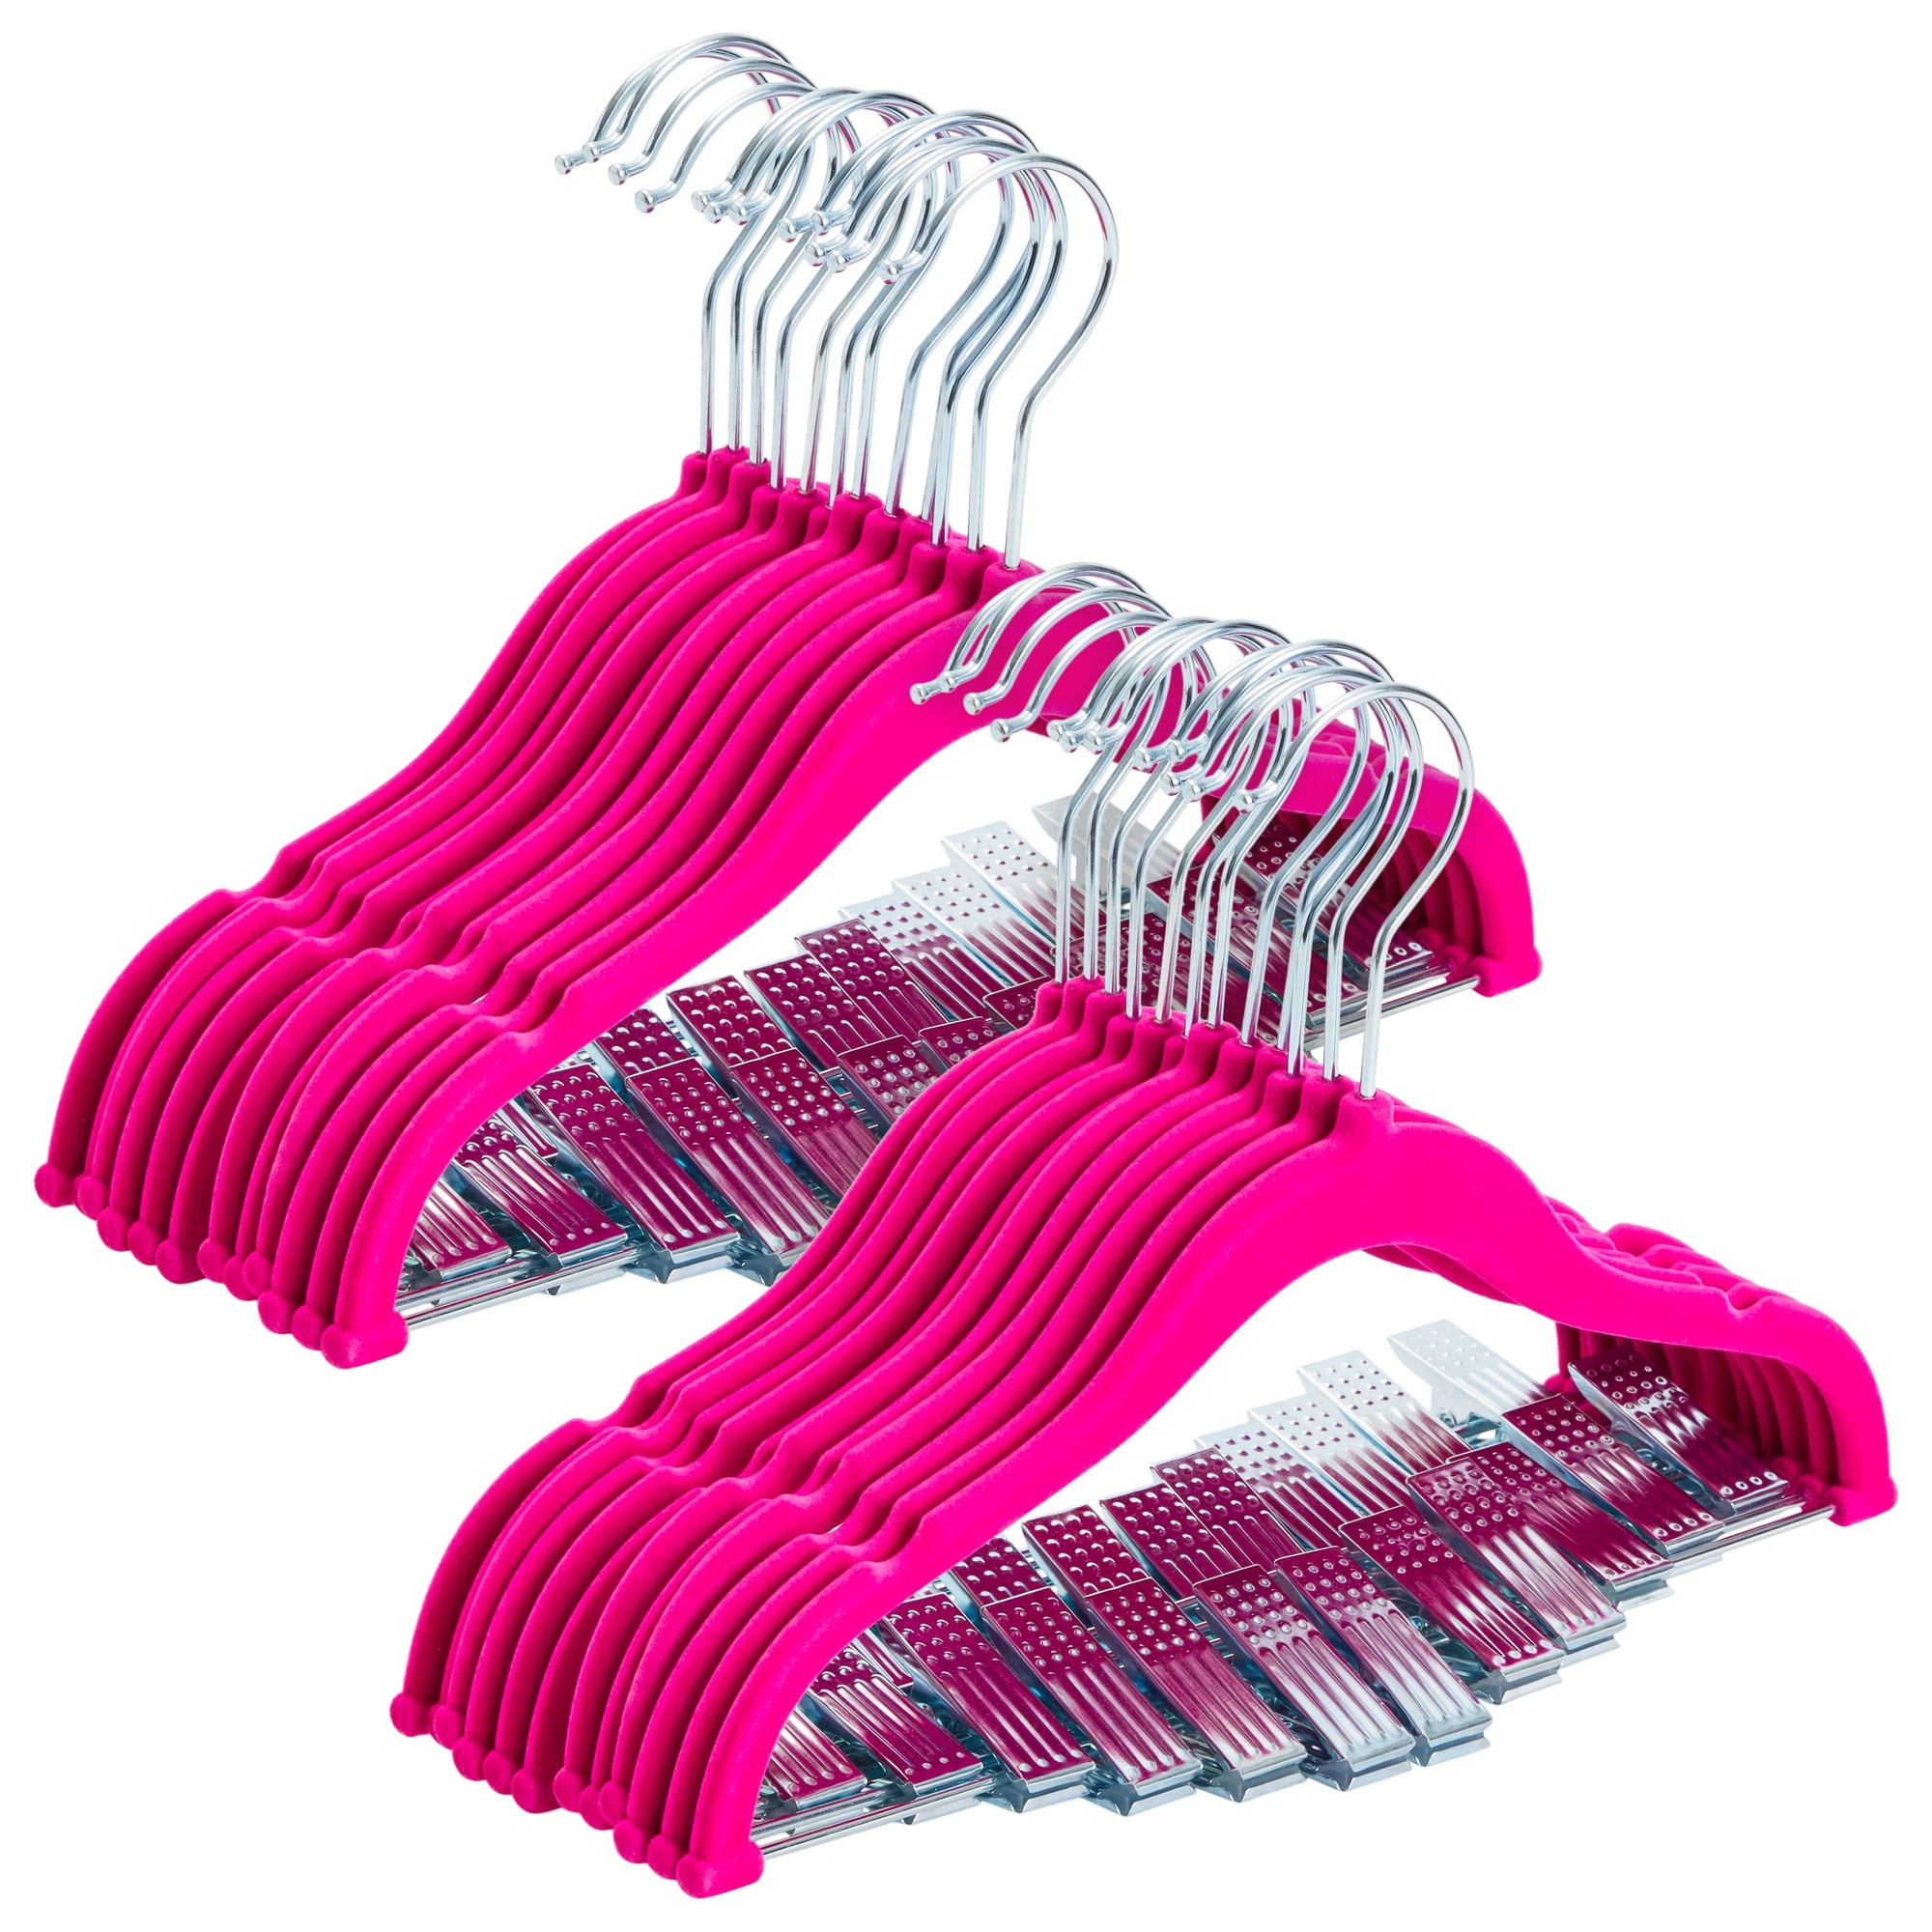 Home-it 10 Pack Clothes Hangers with clips PINK Velvet Hangers use